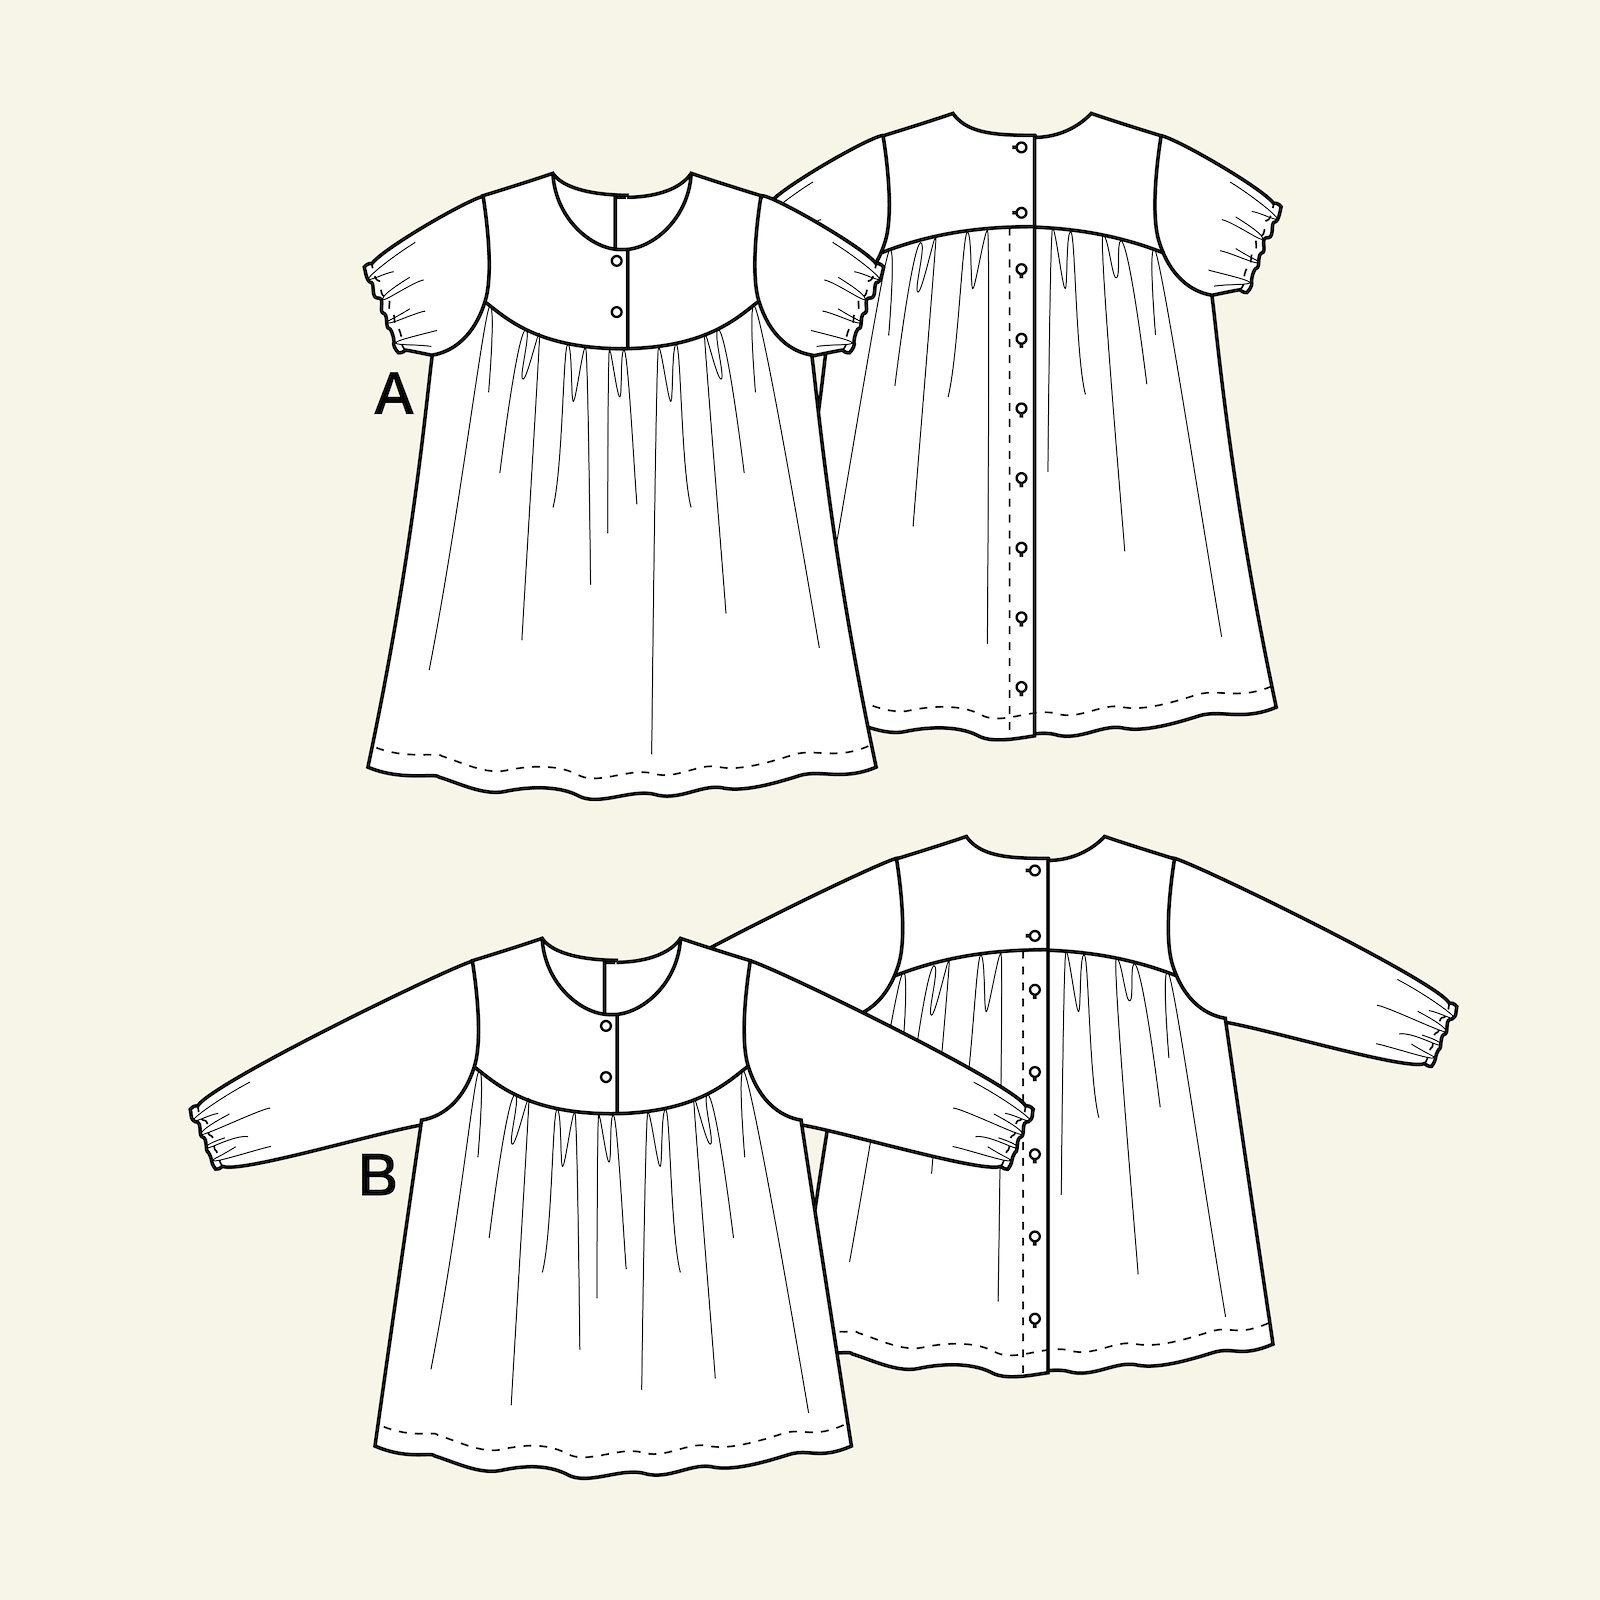 Dress and blouse with yoke and gathers 68-98 p83011000_p83011001_p83011002_p83011003_p83011004_pack_b.png